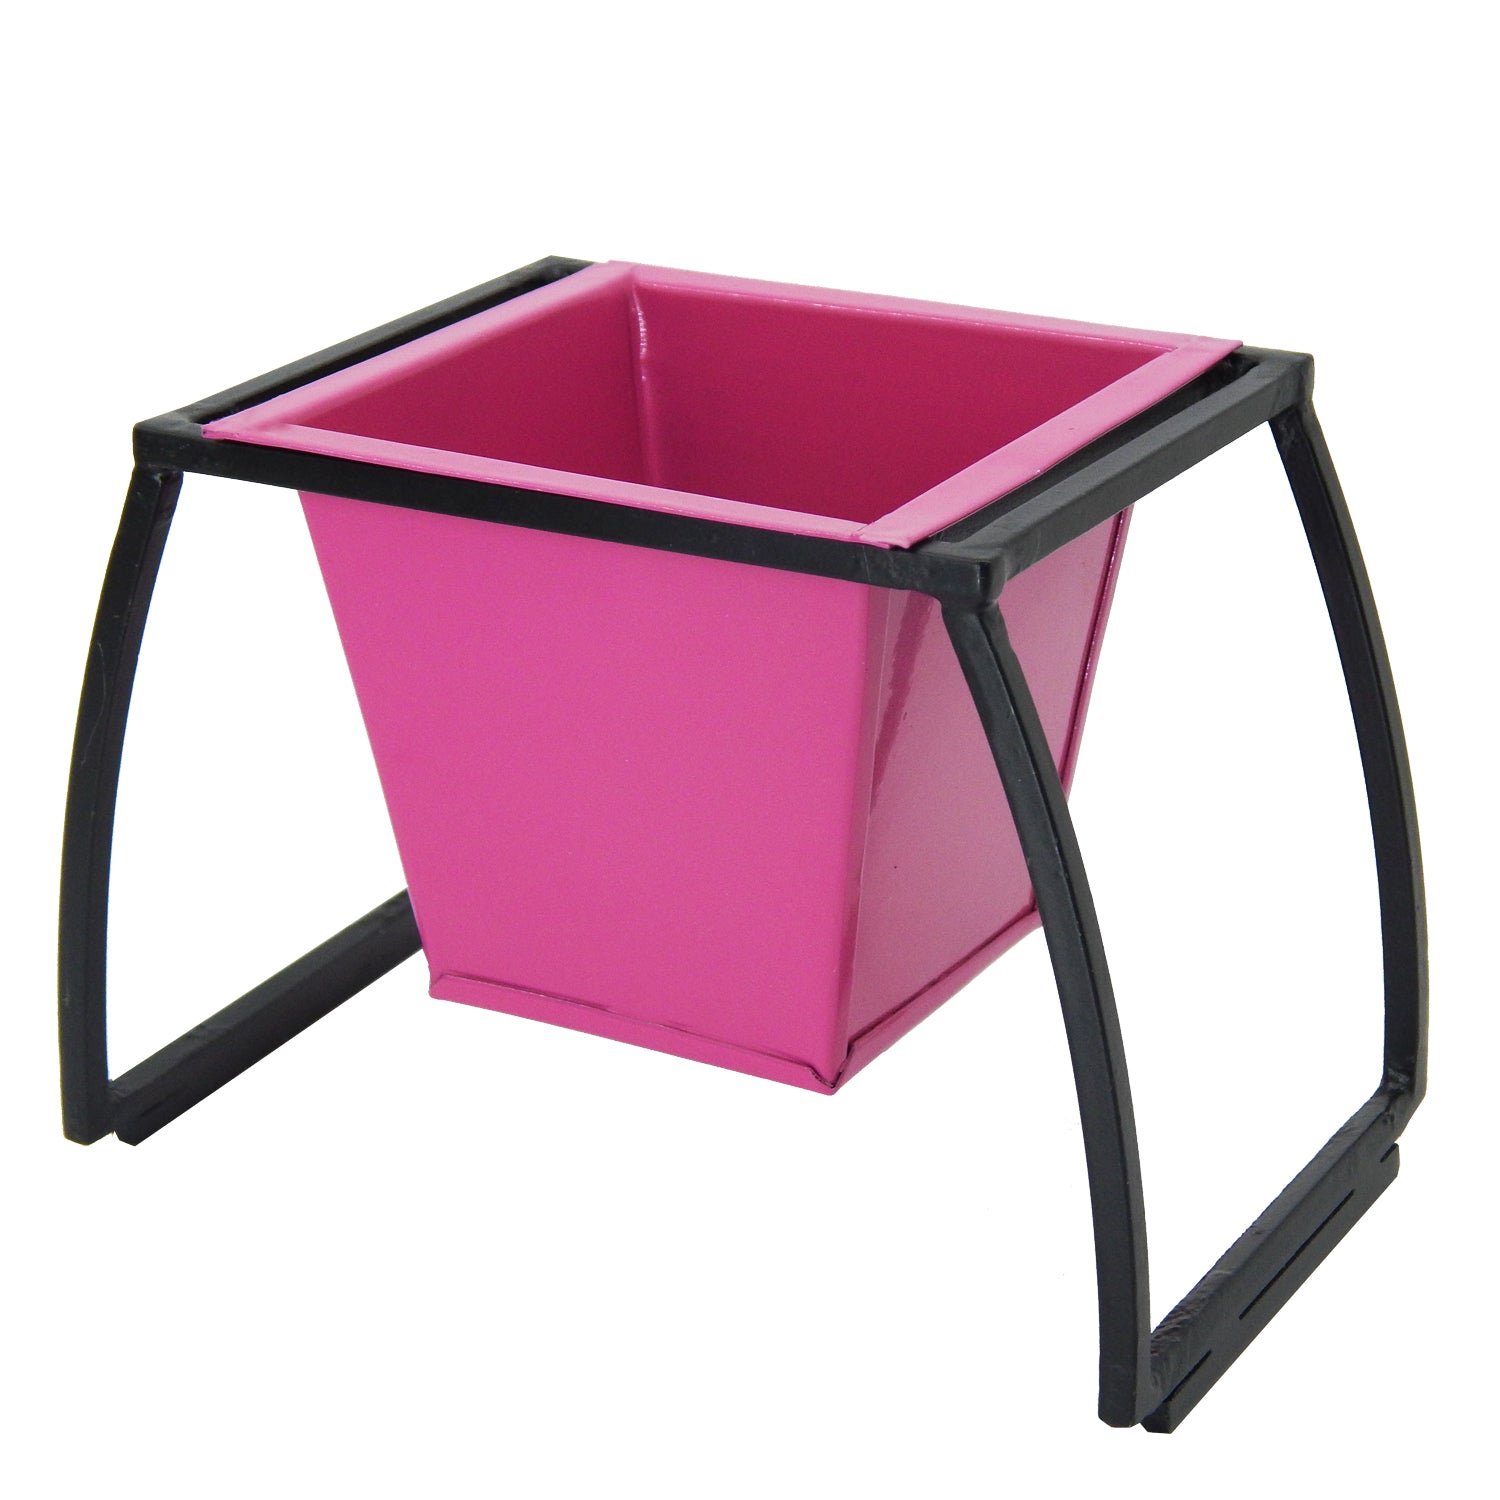 ecofynd Stackable Table Top Planter Pot with Metal Stand {WITHOUT PLANTS}, Multicolor Desktop Planter freeshipping - Ecofynd